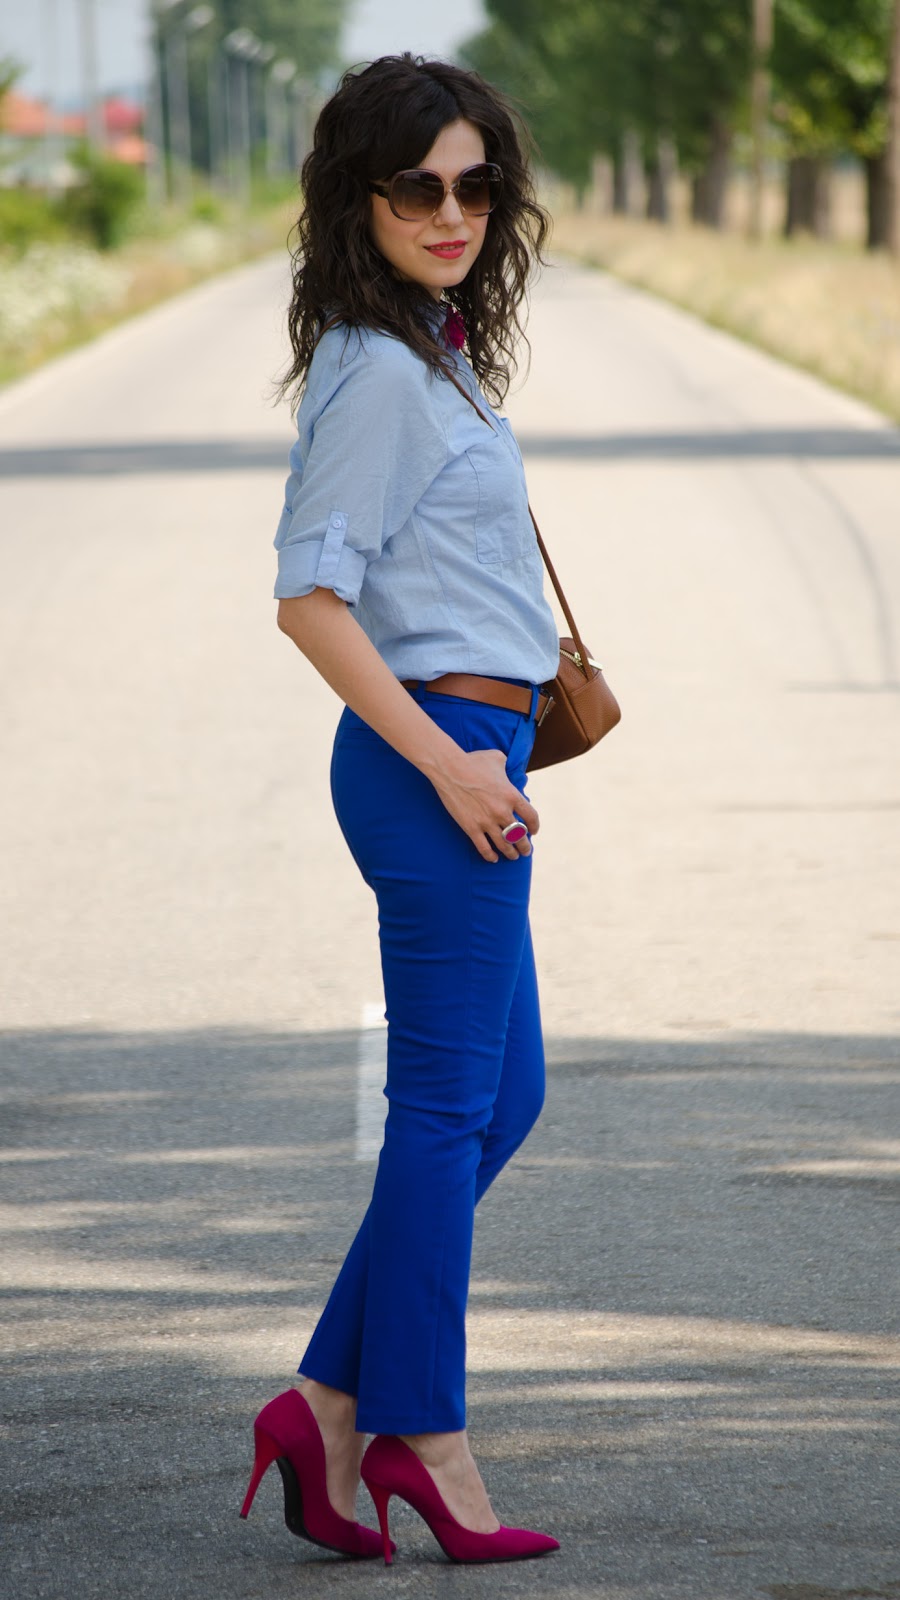 Miss Green: Cobalt blue with pops of fuchsia and brown